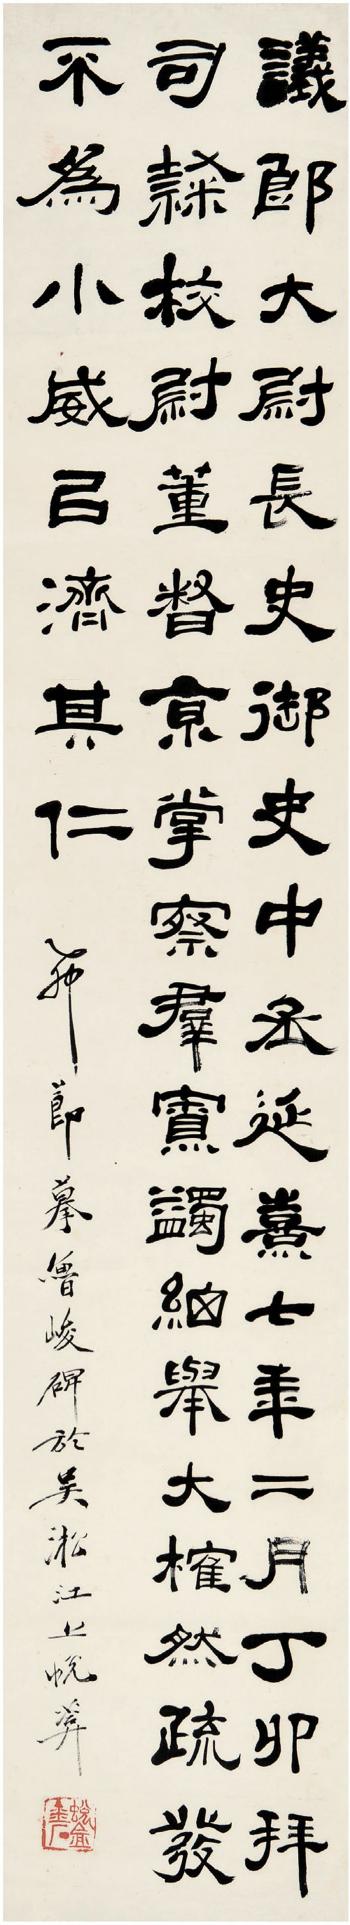 Calligraphy in Official Script by 
																	 Xiao Tuian